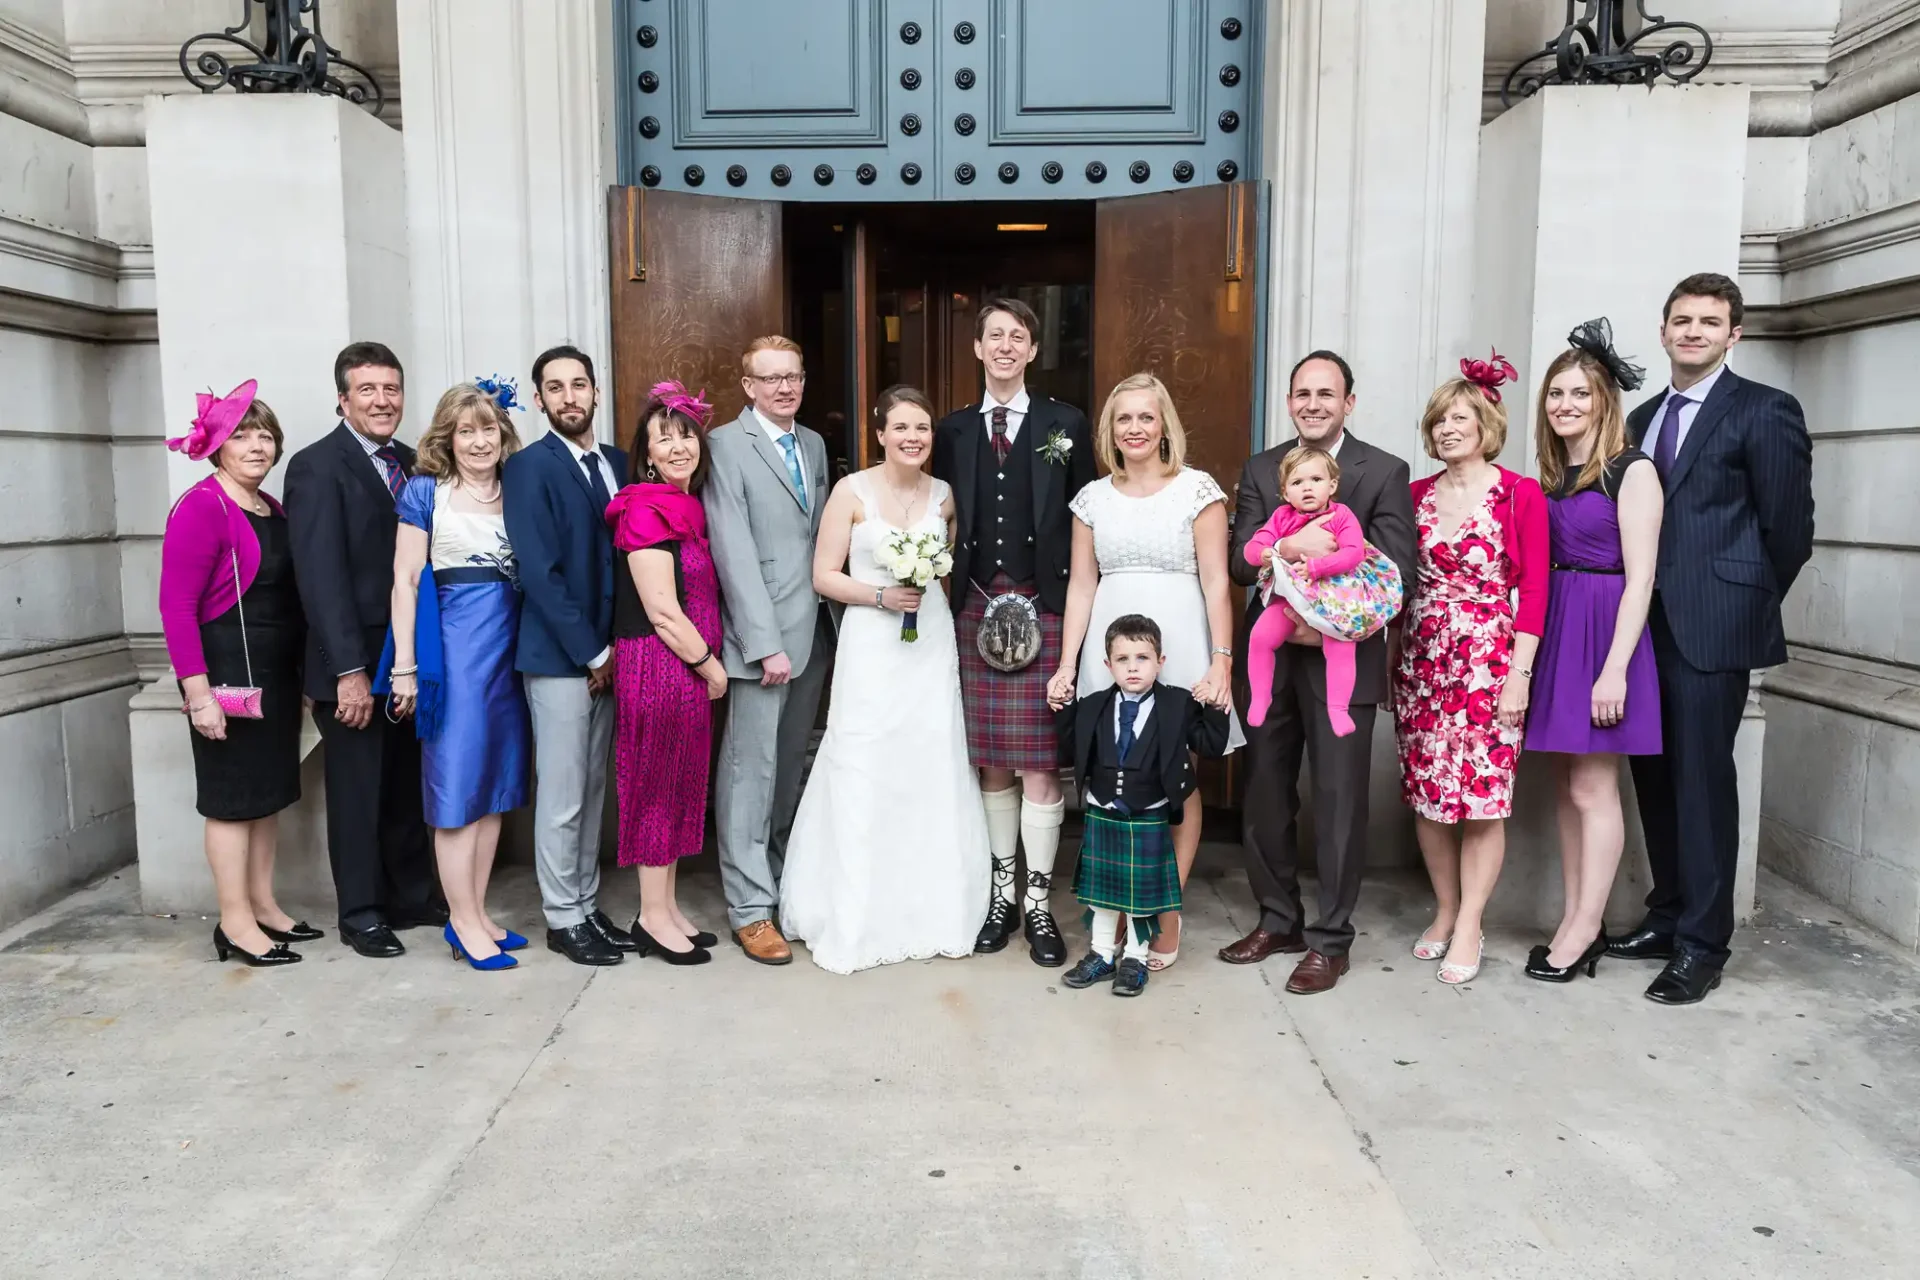 A group of family members in formal attire posing for a photo at a wedding outside a building entrance. some wear kilts; others have hats.